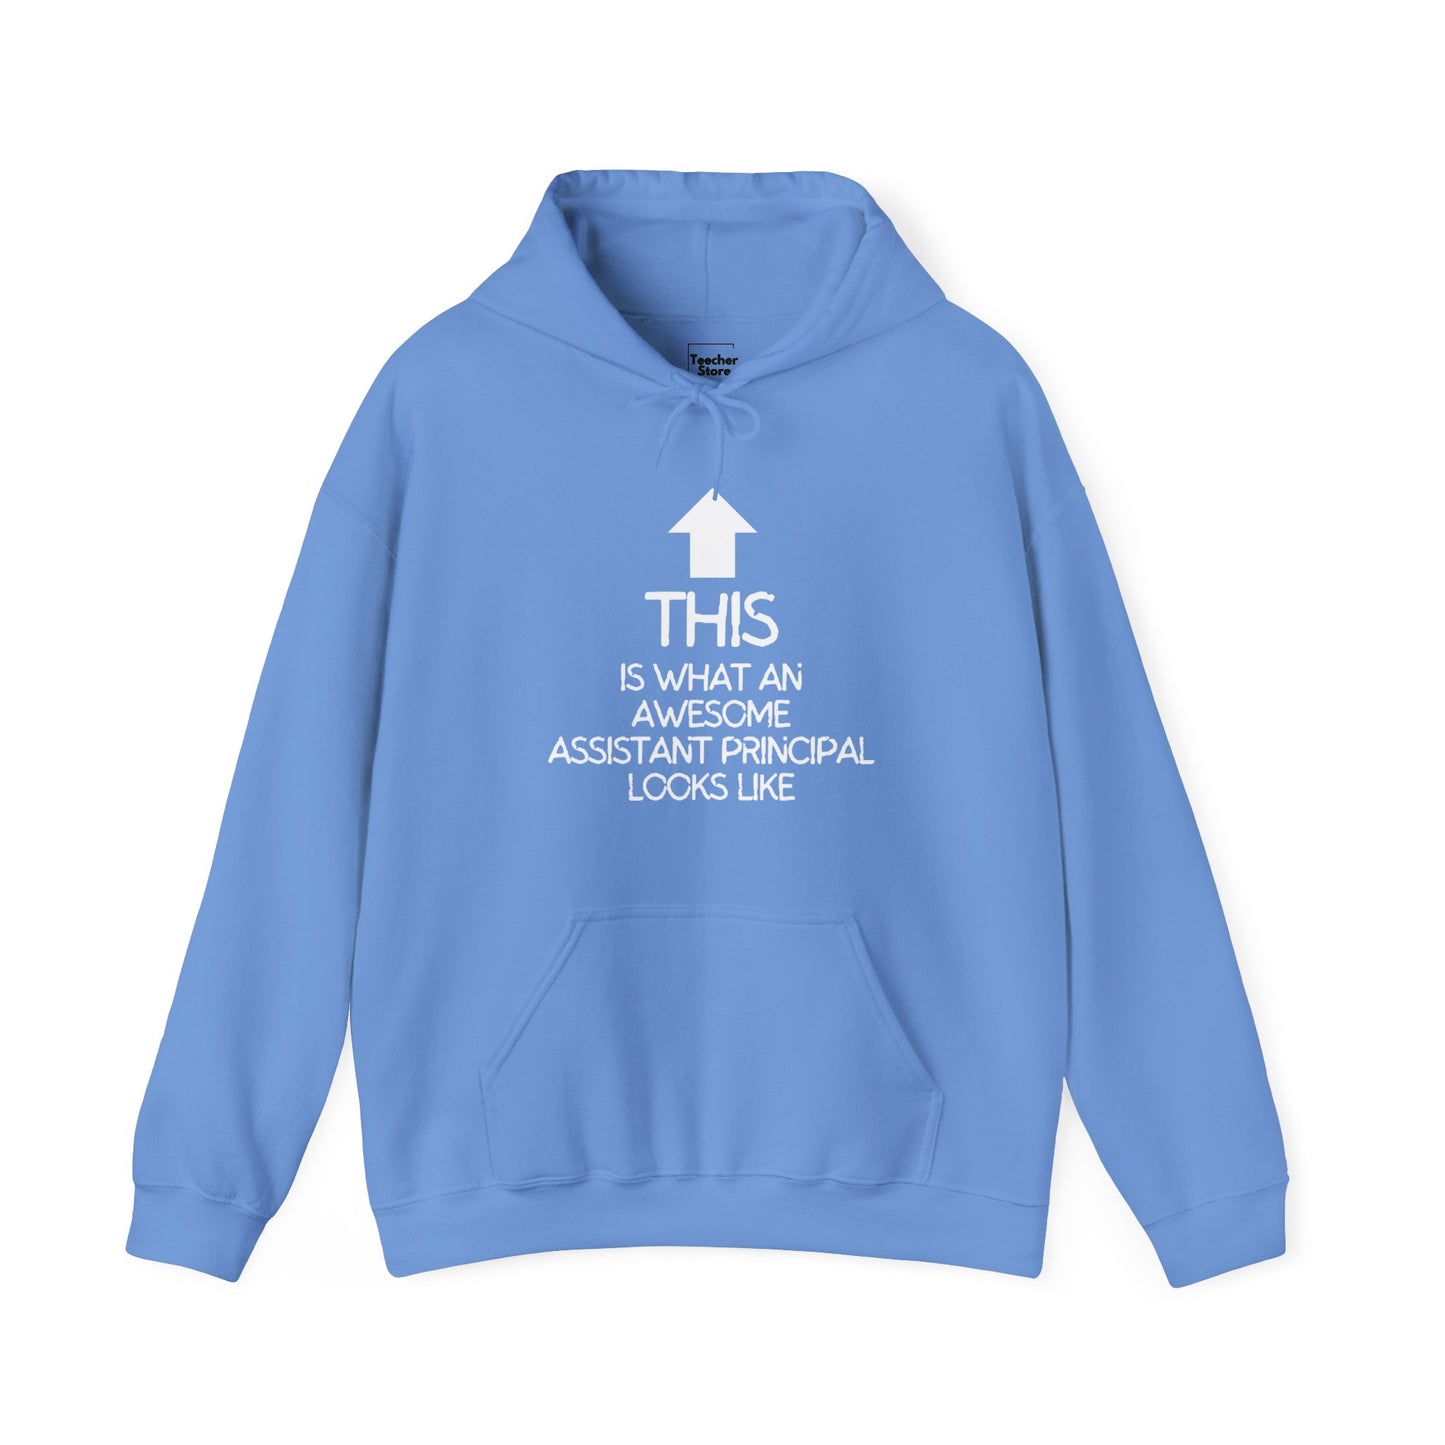 Awesome Assistant Principal Hooded Sweatshirt